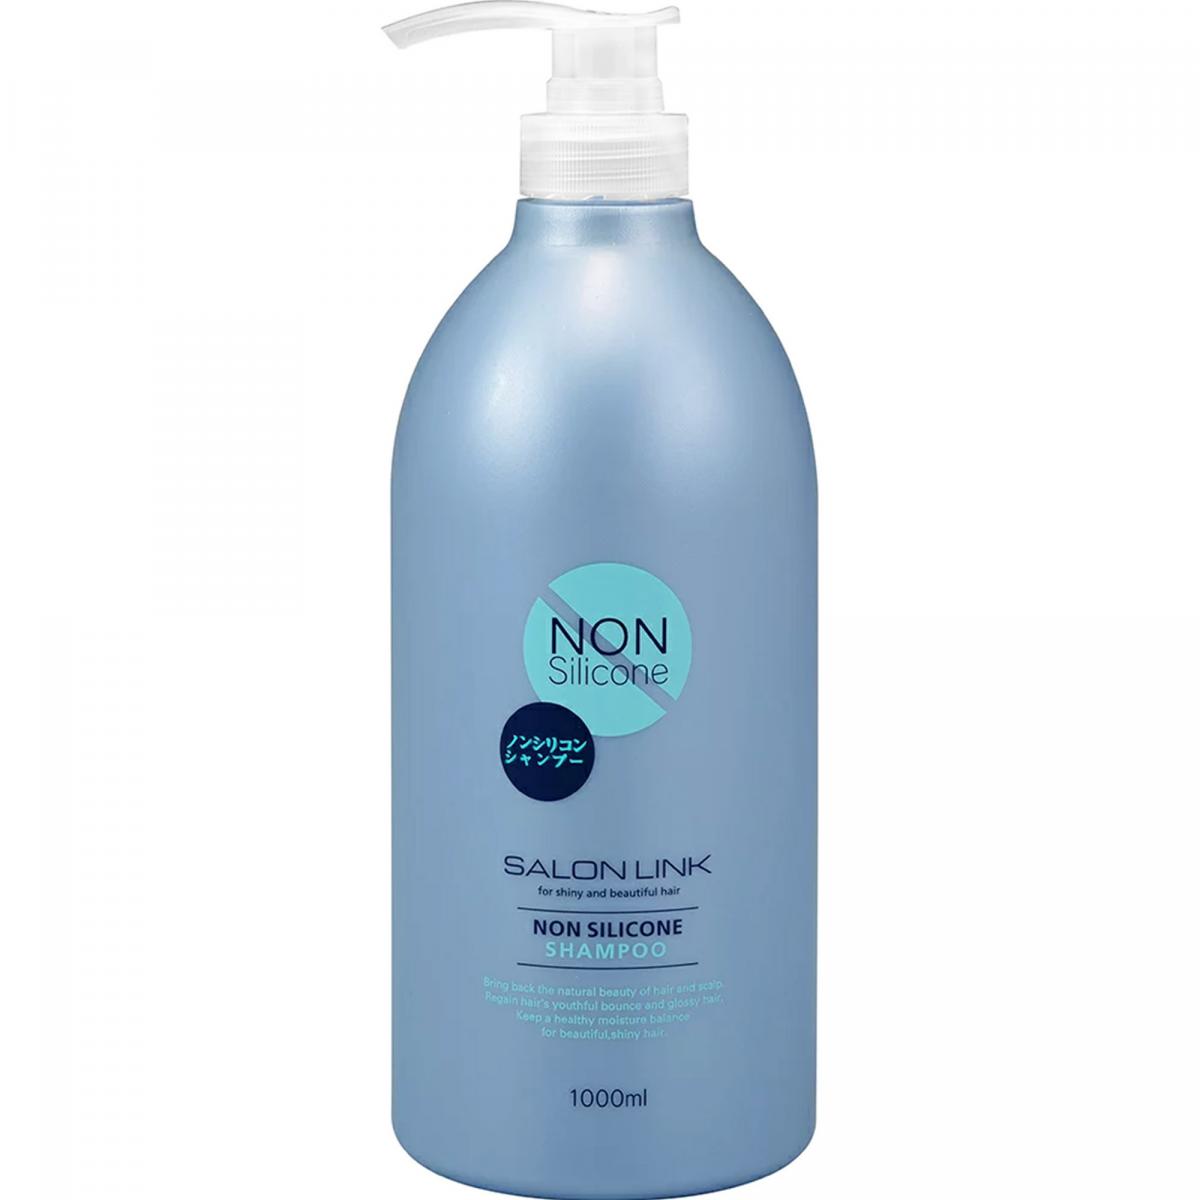 Salon Link Non Silicone Shampoo (For Shiny and Beautiful Hair) 1000ml -16101(parallel import)